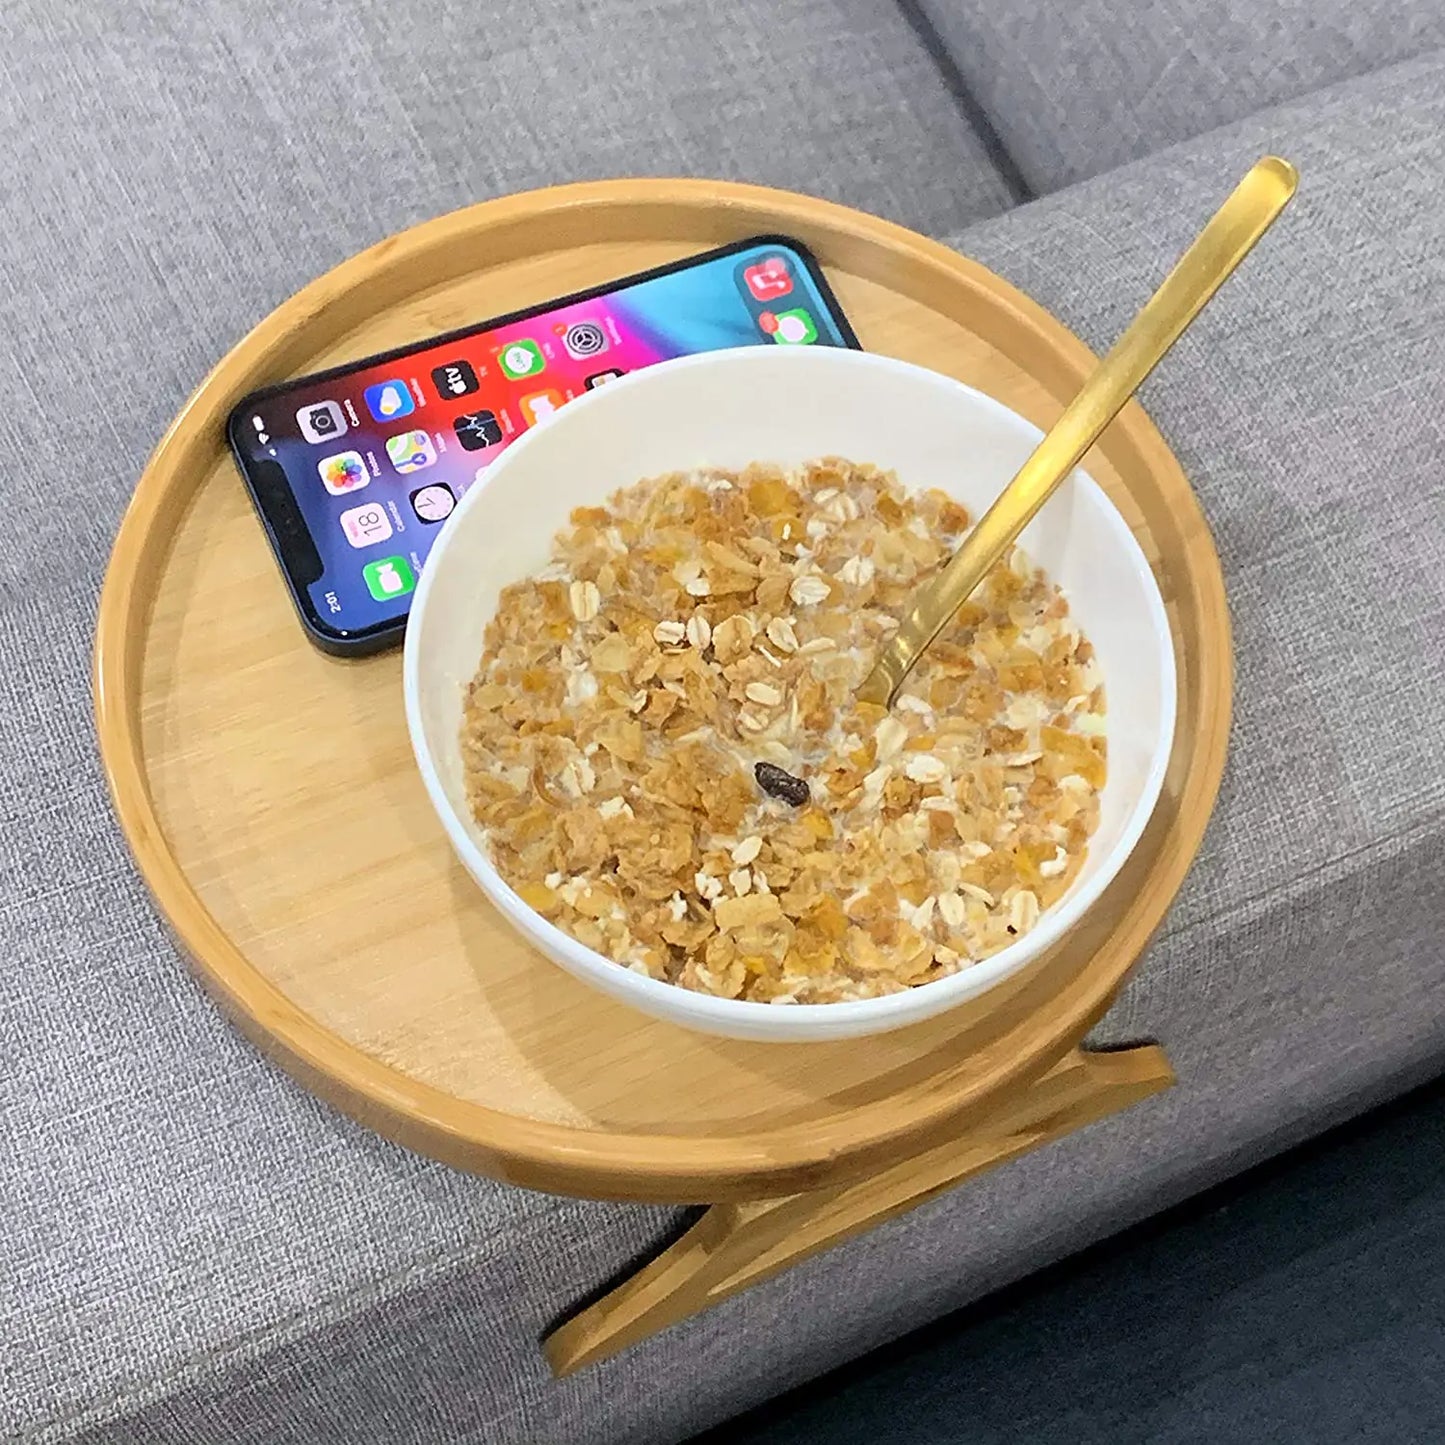 Clip-On Tray: Convenient Space-Saving Solution